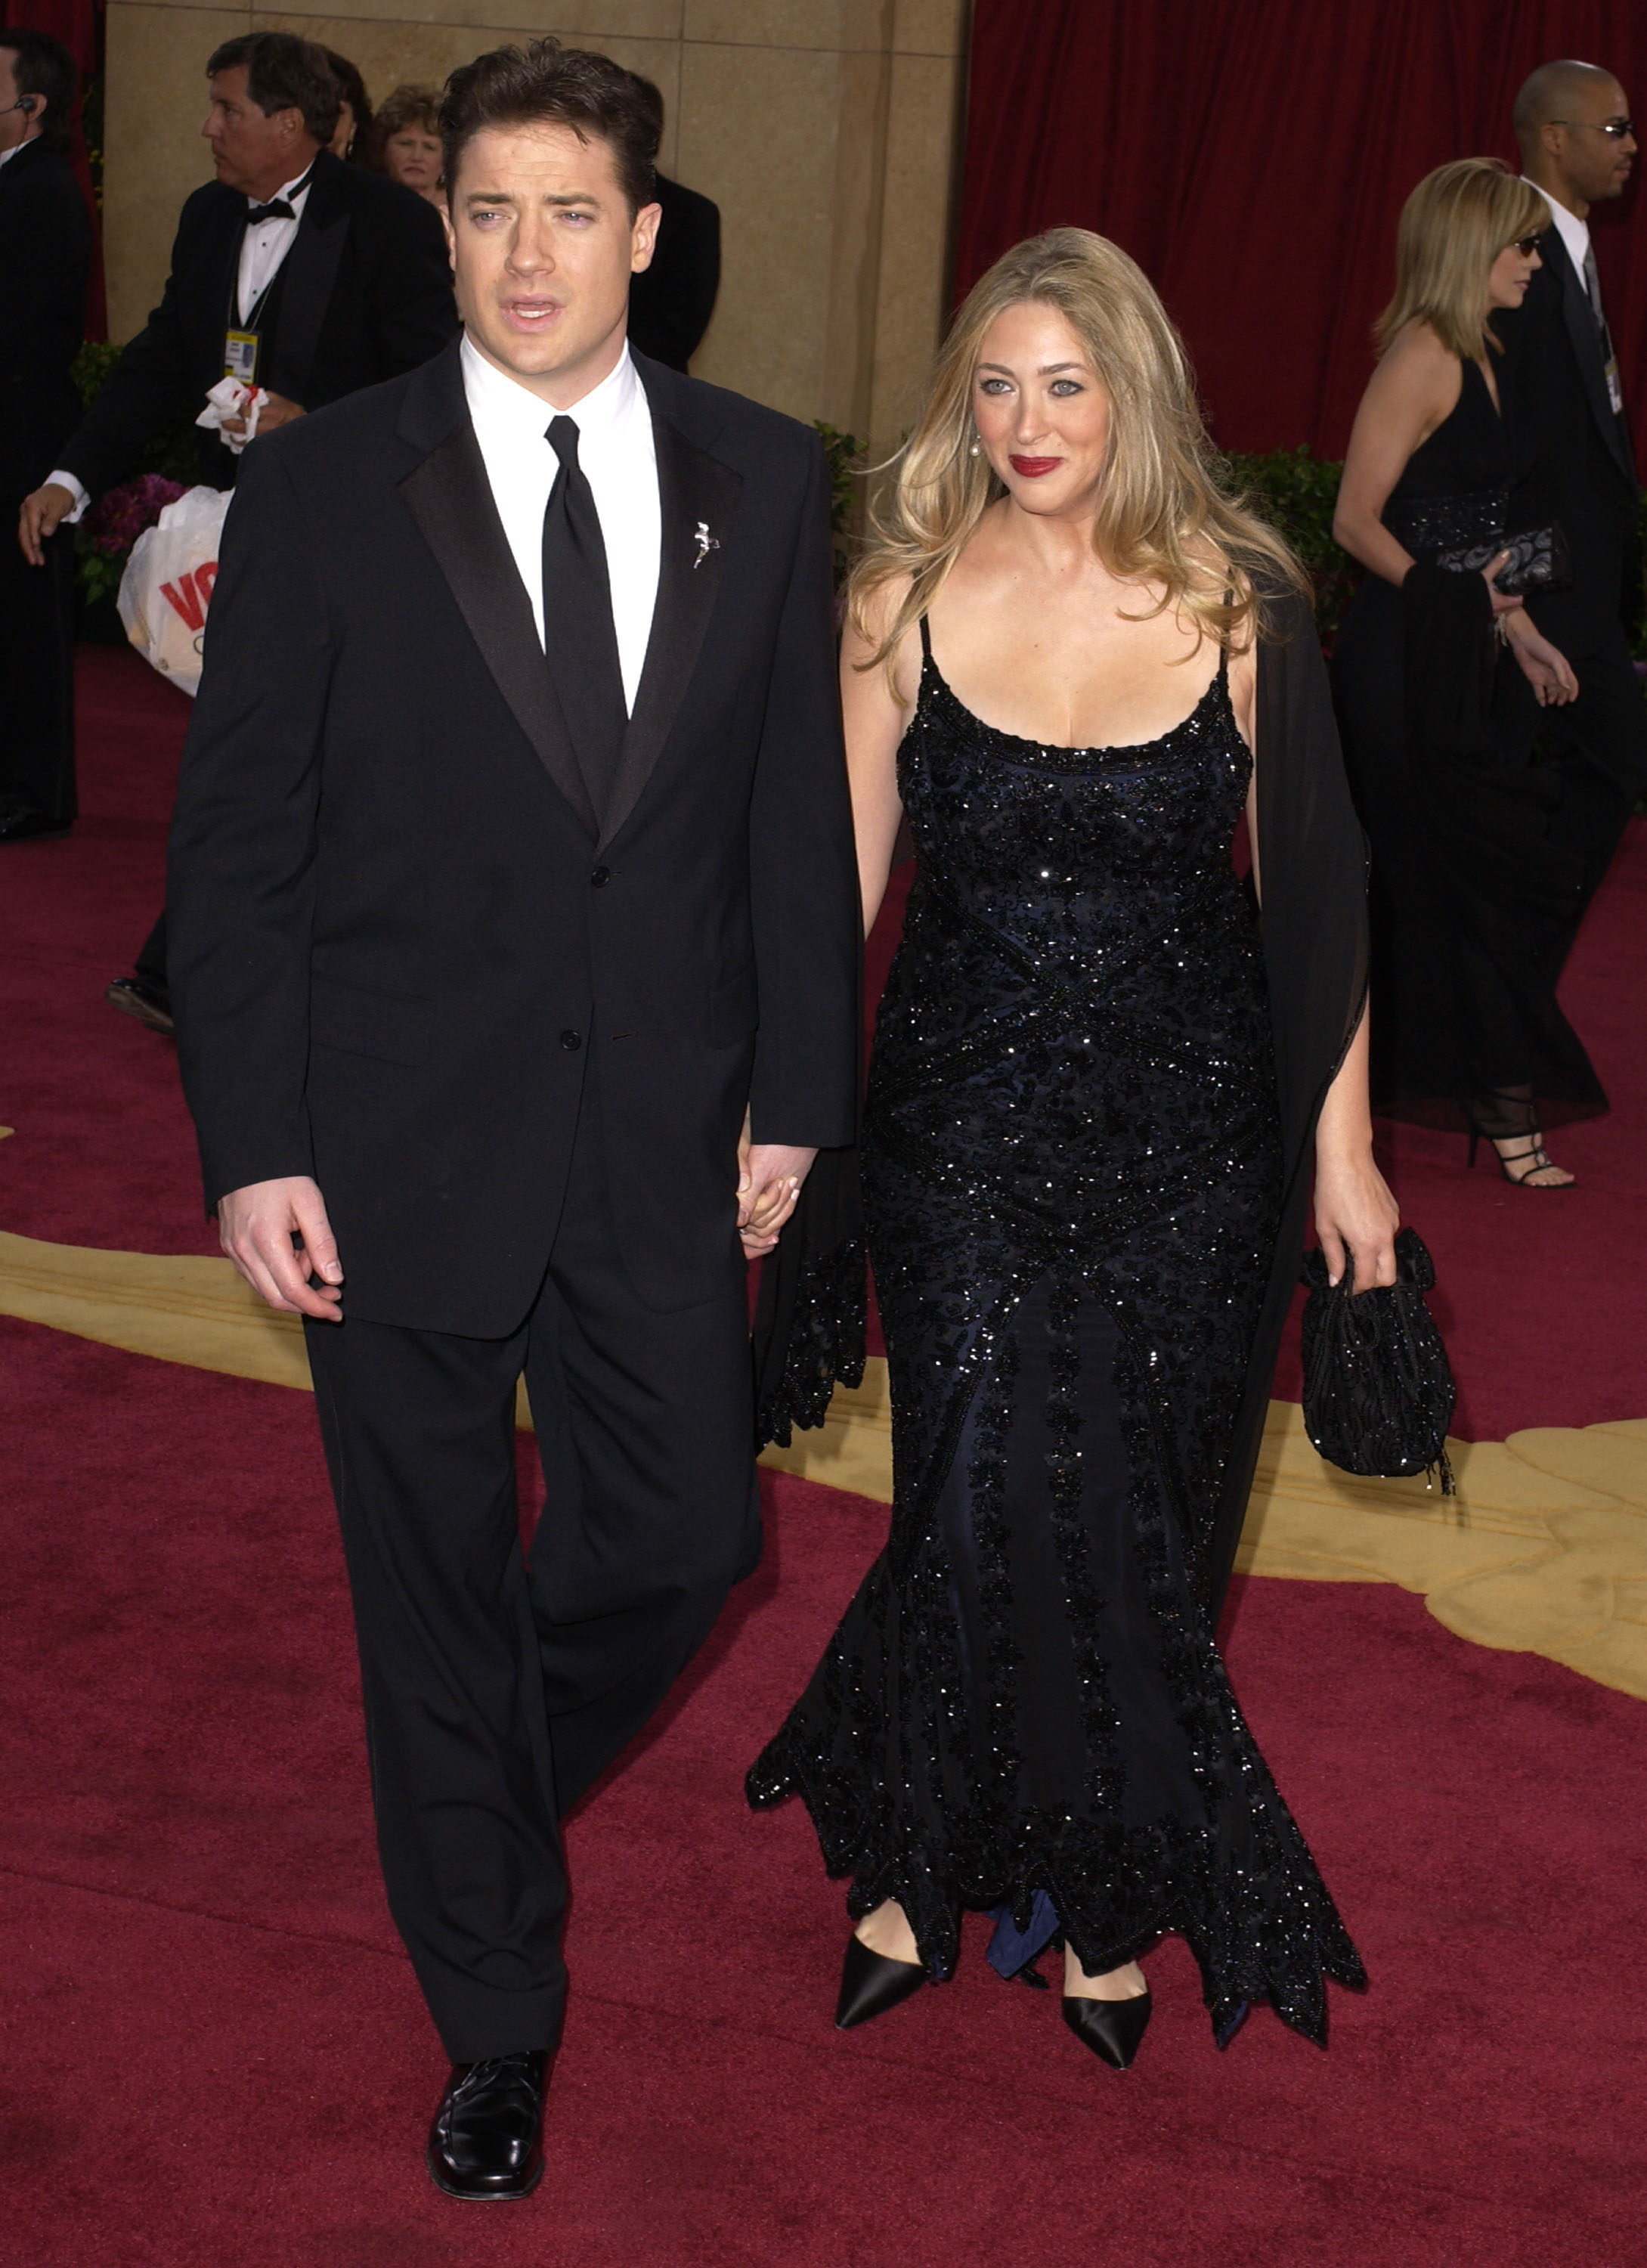 Brendan Fraser and Afton Smith during The 75th Annual Academy Awards in Hollywood, California, on March 23, 2003 | Source: Getty Images